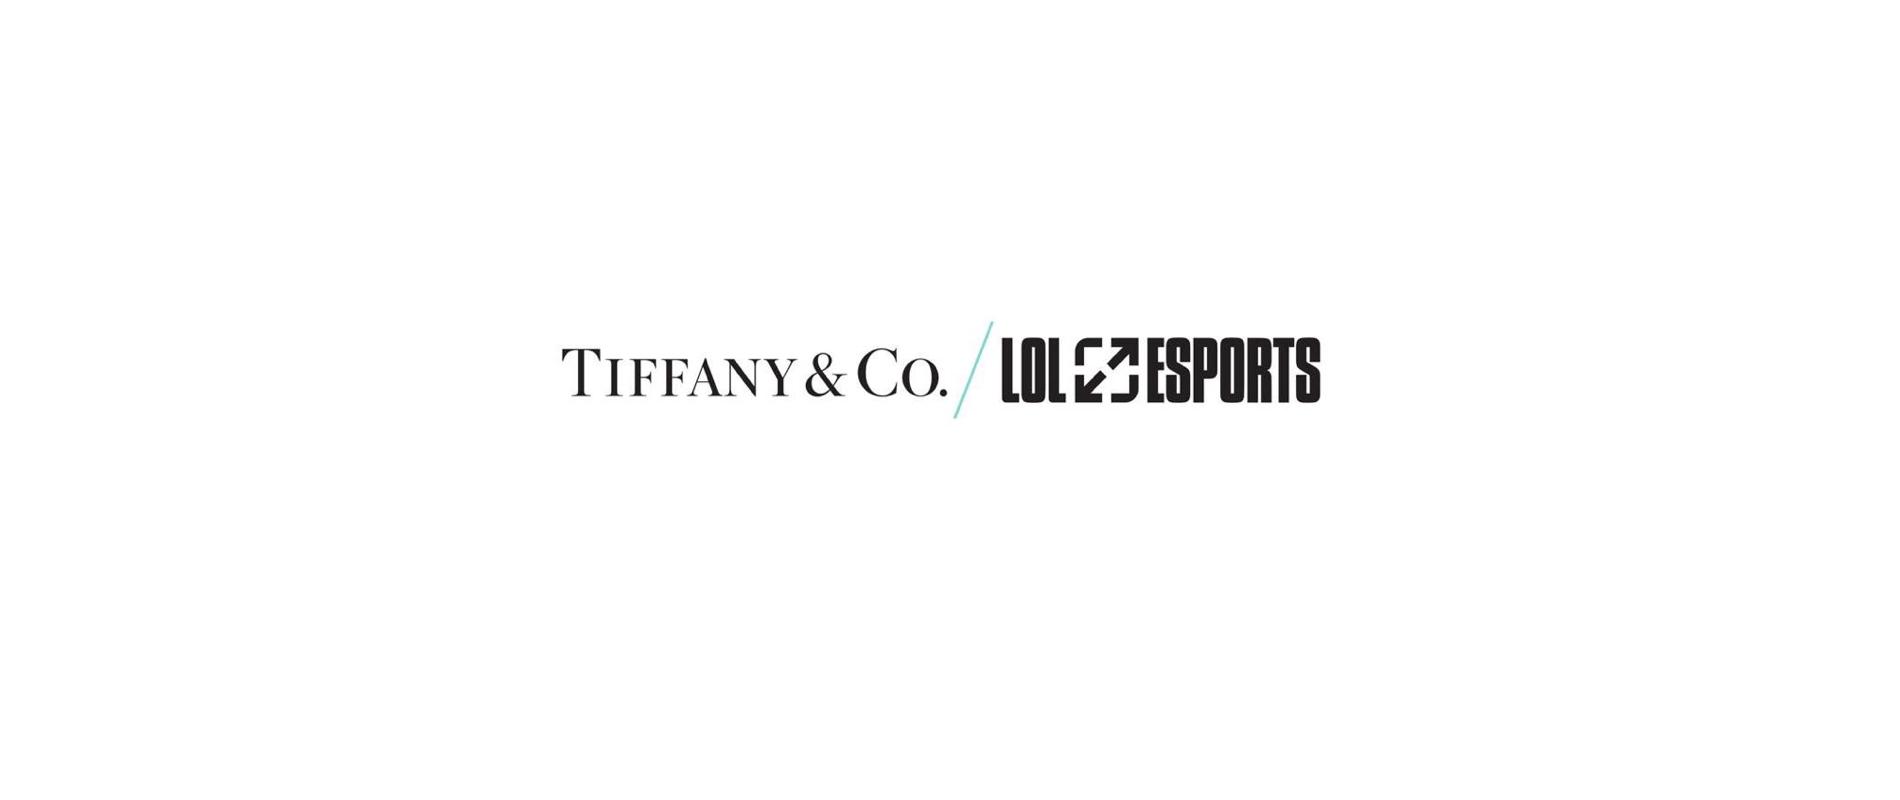 Riot Games Tap Iconic Jeweler Tiffany & Co. as Official Trophy